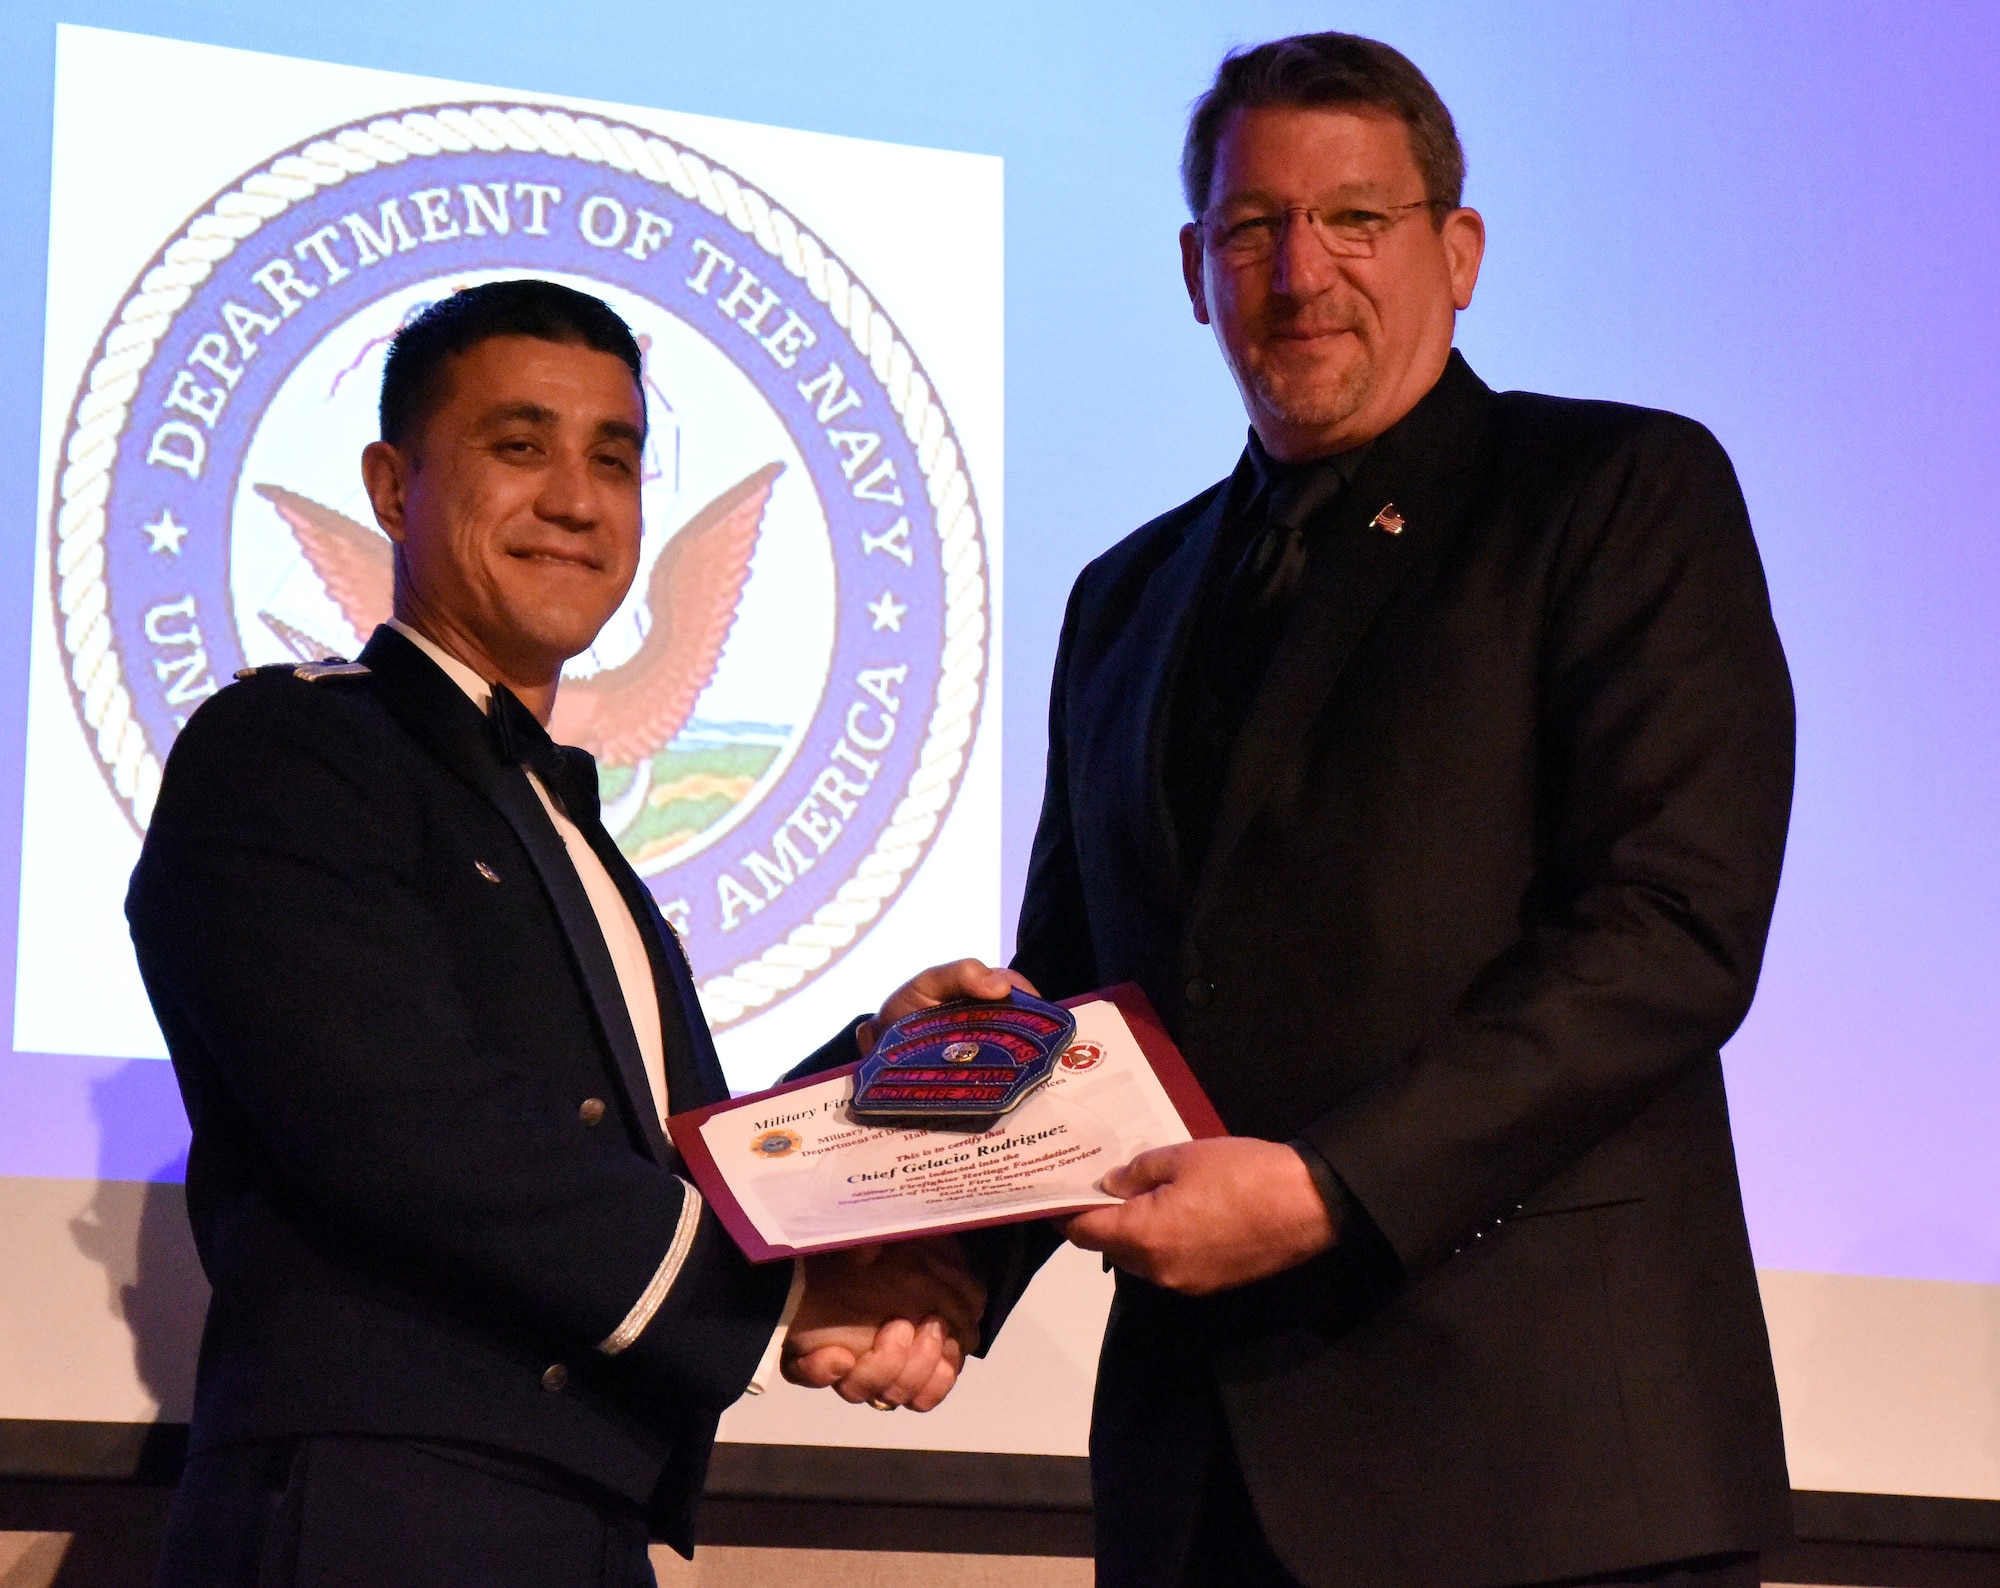 U.S. Air Force Col. Ricky Mills, 17th Training Wing commander, presents Chief Gene Rausch, guest of honor, with a clip for a firefighter helmet as congratulations during the 16th Annual Firefighter Ball at the McNease Convention Center, San Angelo, Texas, April 28, 2018. The hall of fame inductee award is intended for Chief Gelacio Rodriquez, firefighter hall of fame inductee, who could not attend the ball. (U.S. Air Force photo by Airman 1st Class Seraiah Hines/Released)